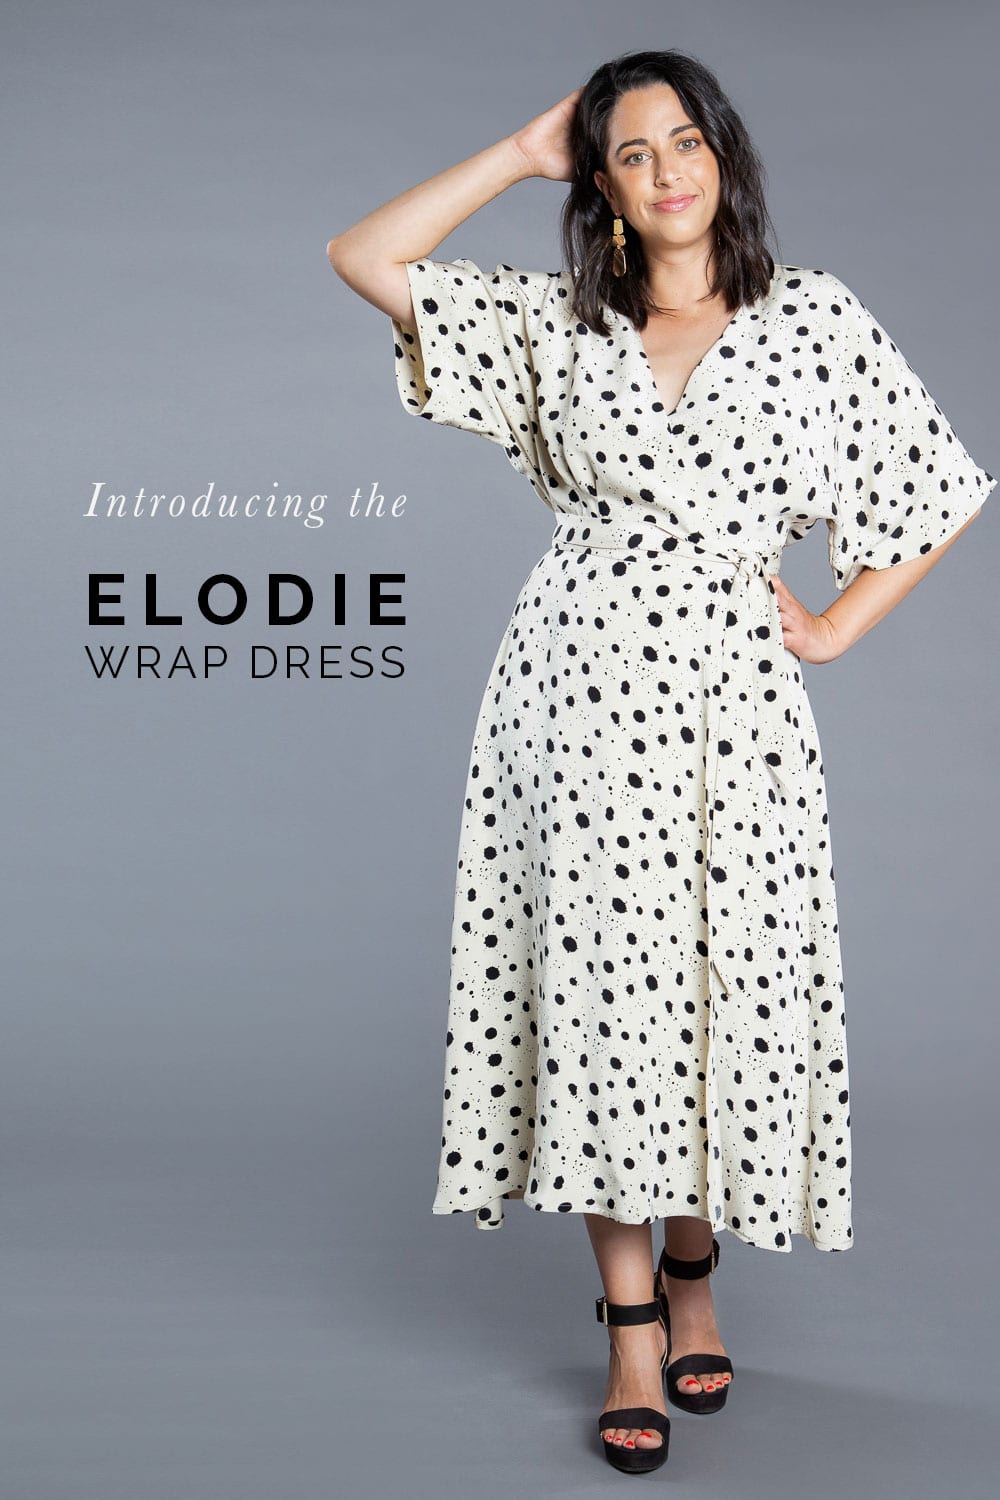 Elodie Wrap Dress Pattern // Versatile wrap dress sewing pattern with multiple bodices and skirts // by Closet Core Patterns